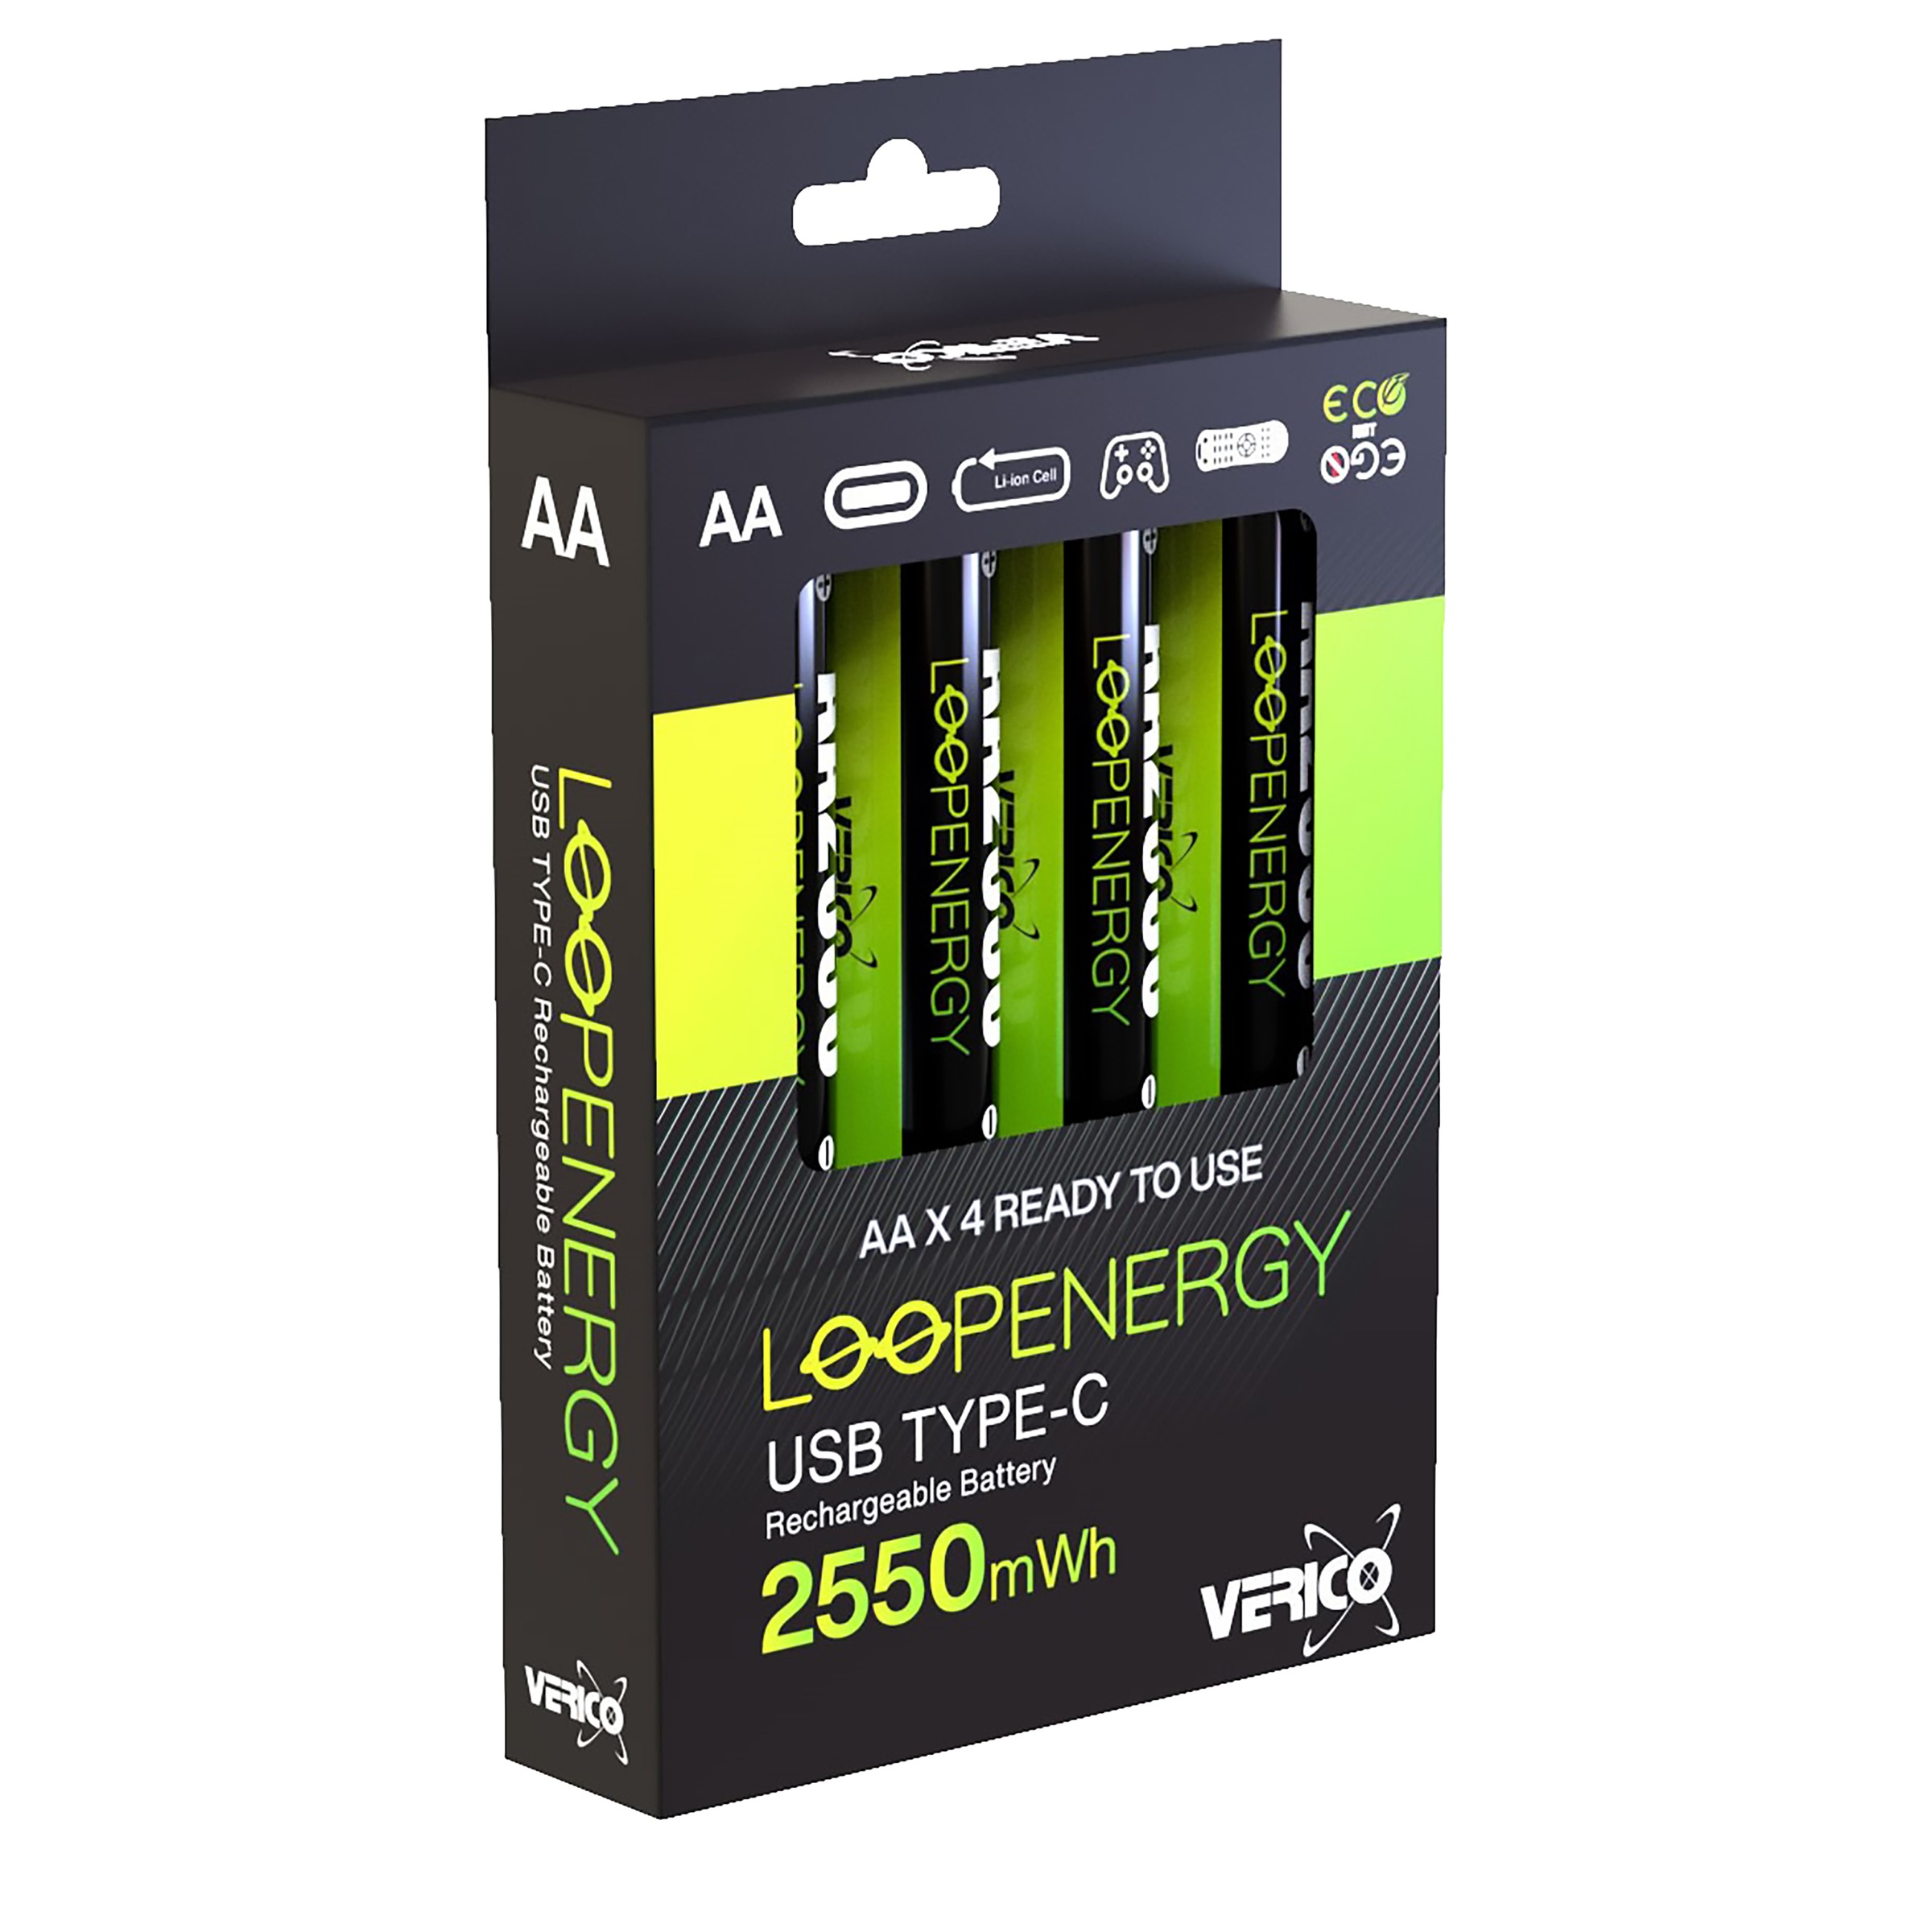 Verico Batterie »Loopenergy AA (Mignon)«, 1,5 V, (4 St.), USB-C Kabel im Lieferumfang